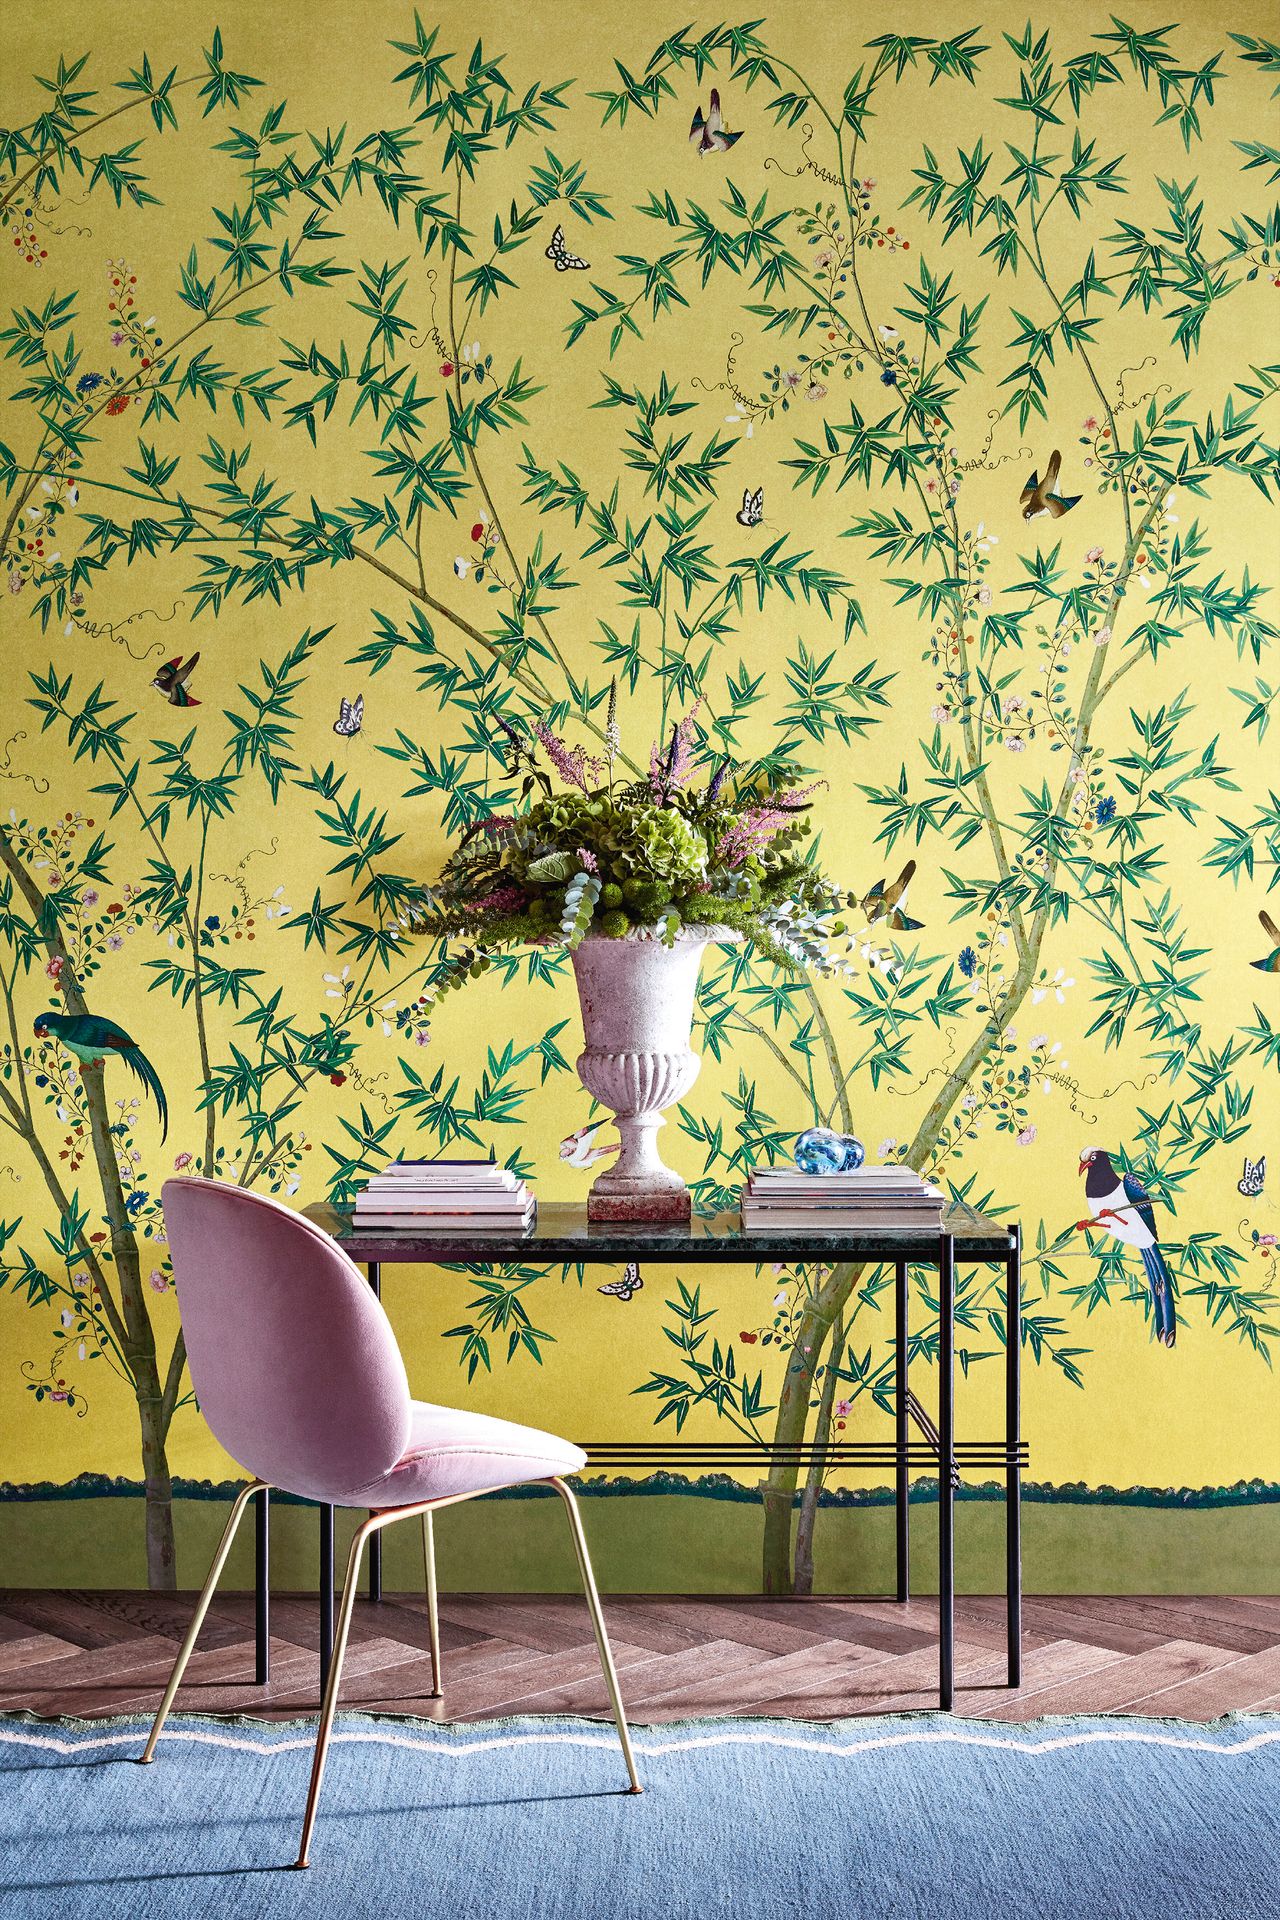 Chinoiserie: 13 ways to decorate with Chinoiserie